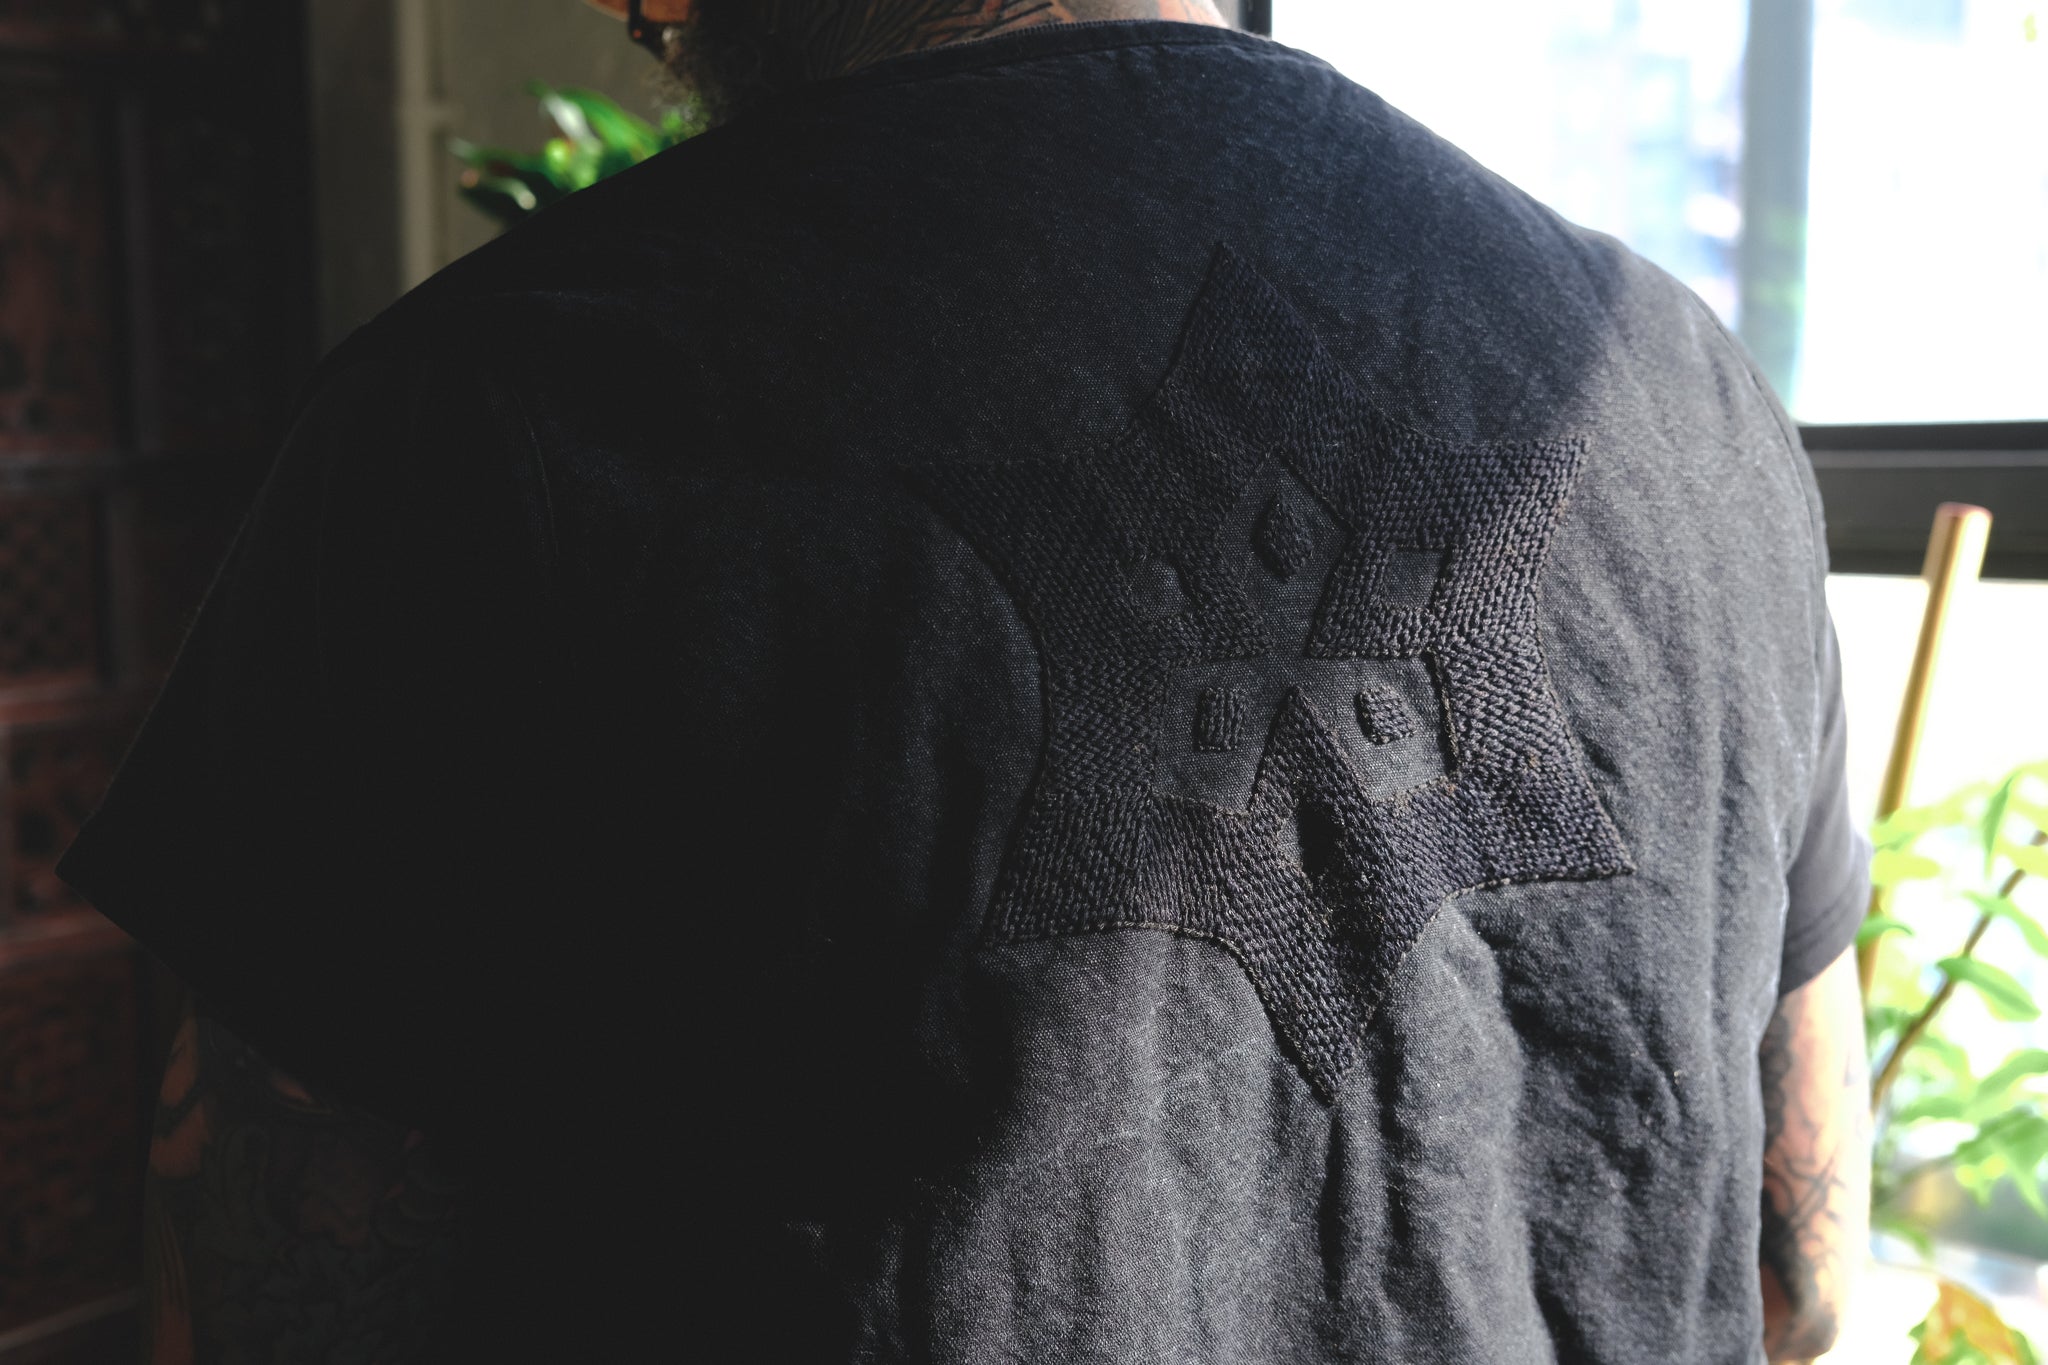 A close up image of the embroidery on the back of the vest.